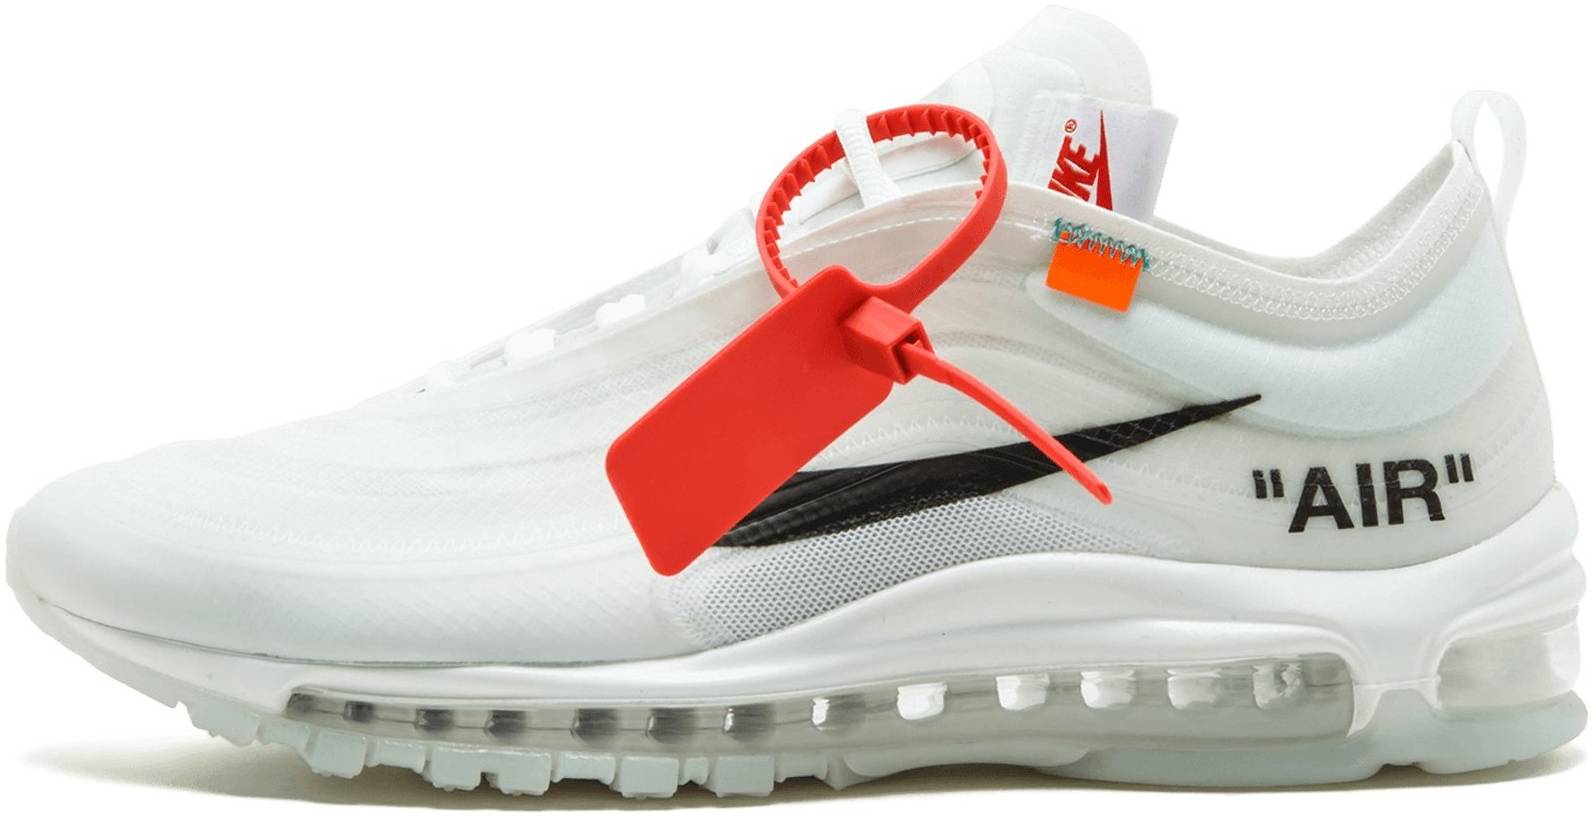 Review of Off-White x Nike Air Max 97 